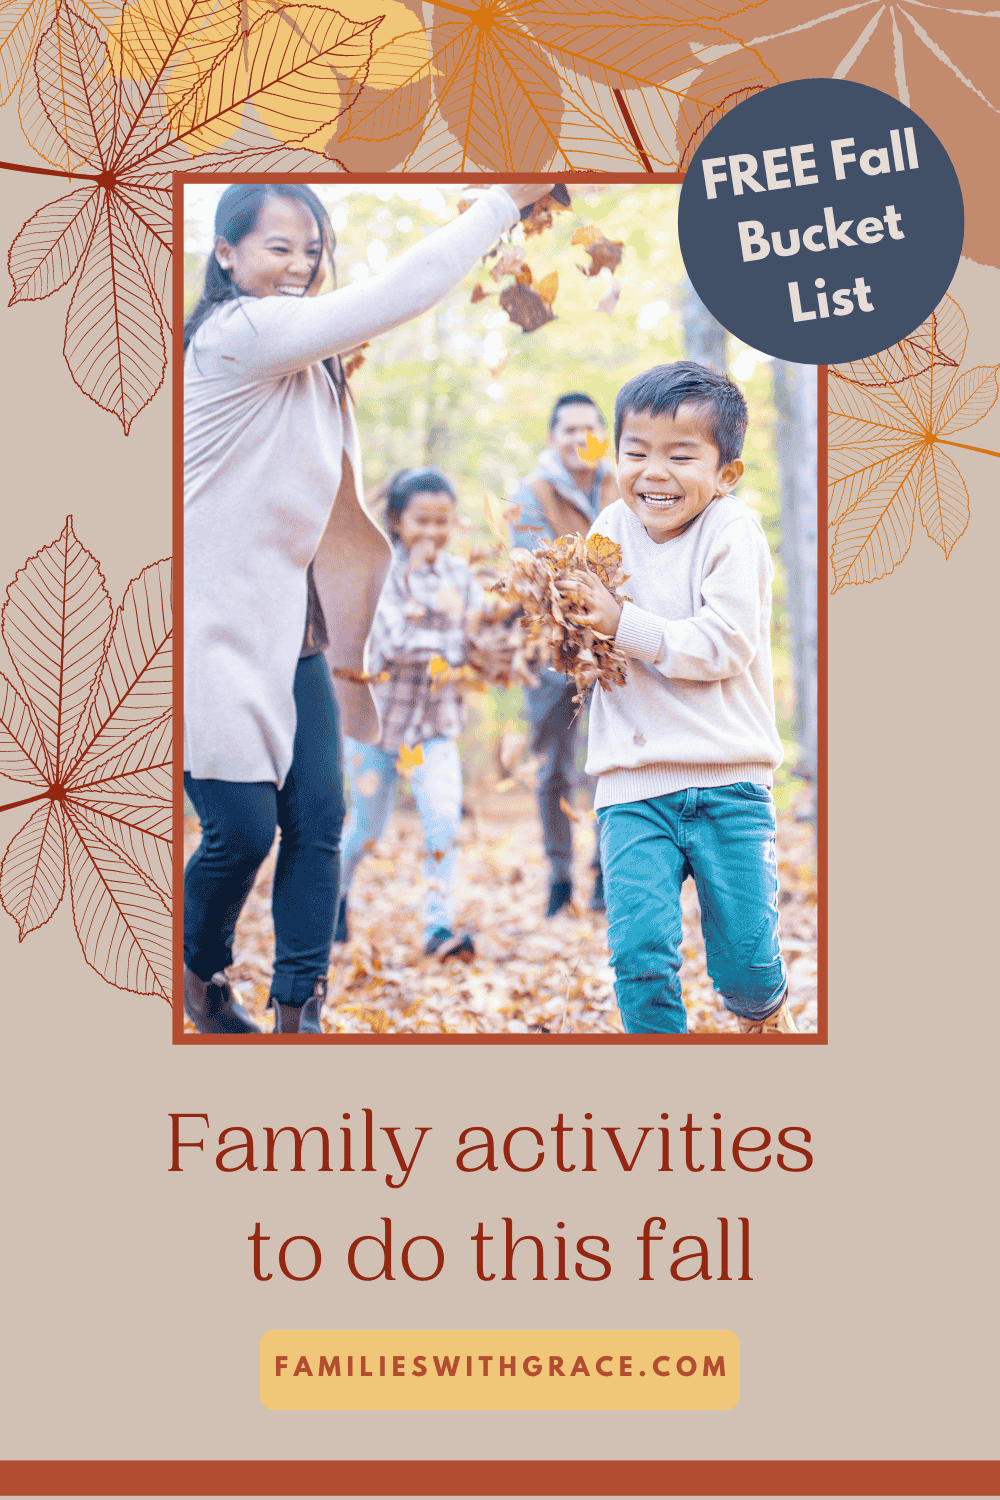 Family activities to do this fall